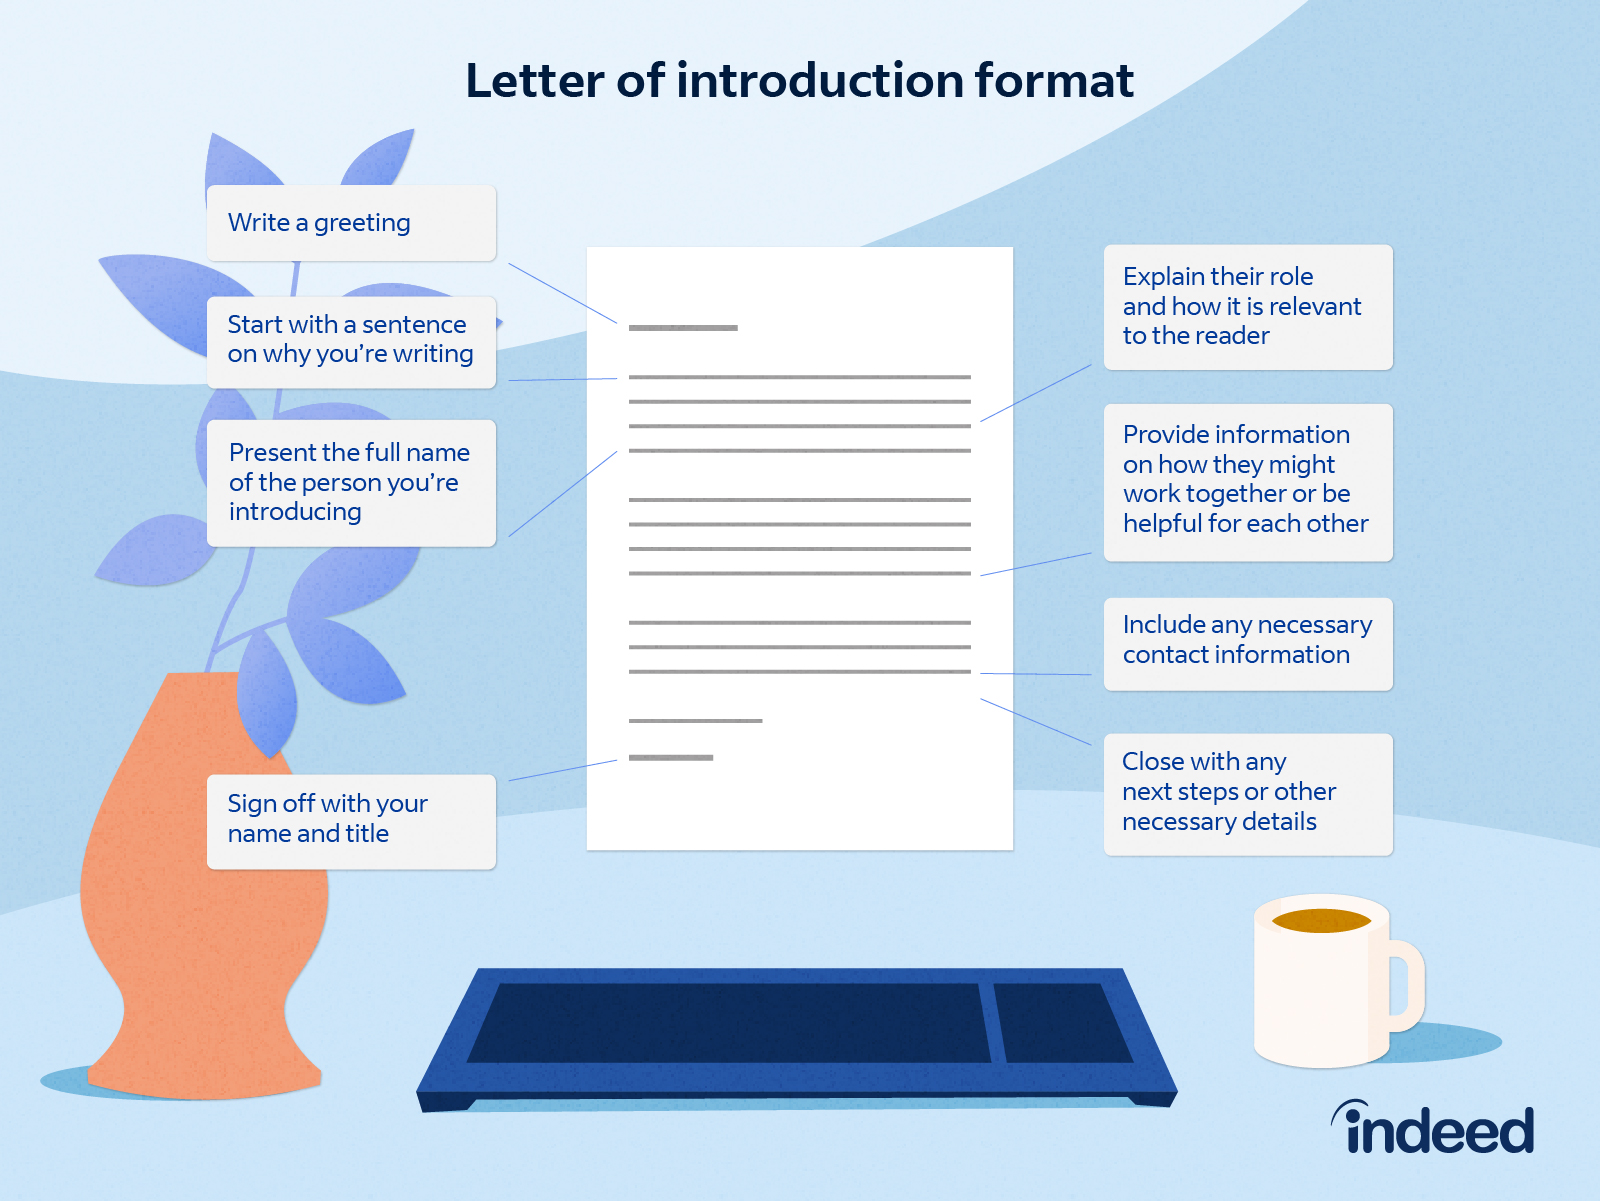 self introduction letter sample to colleague